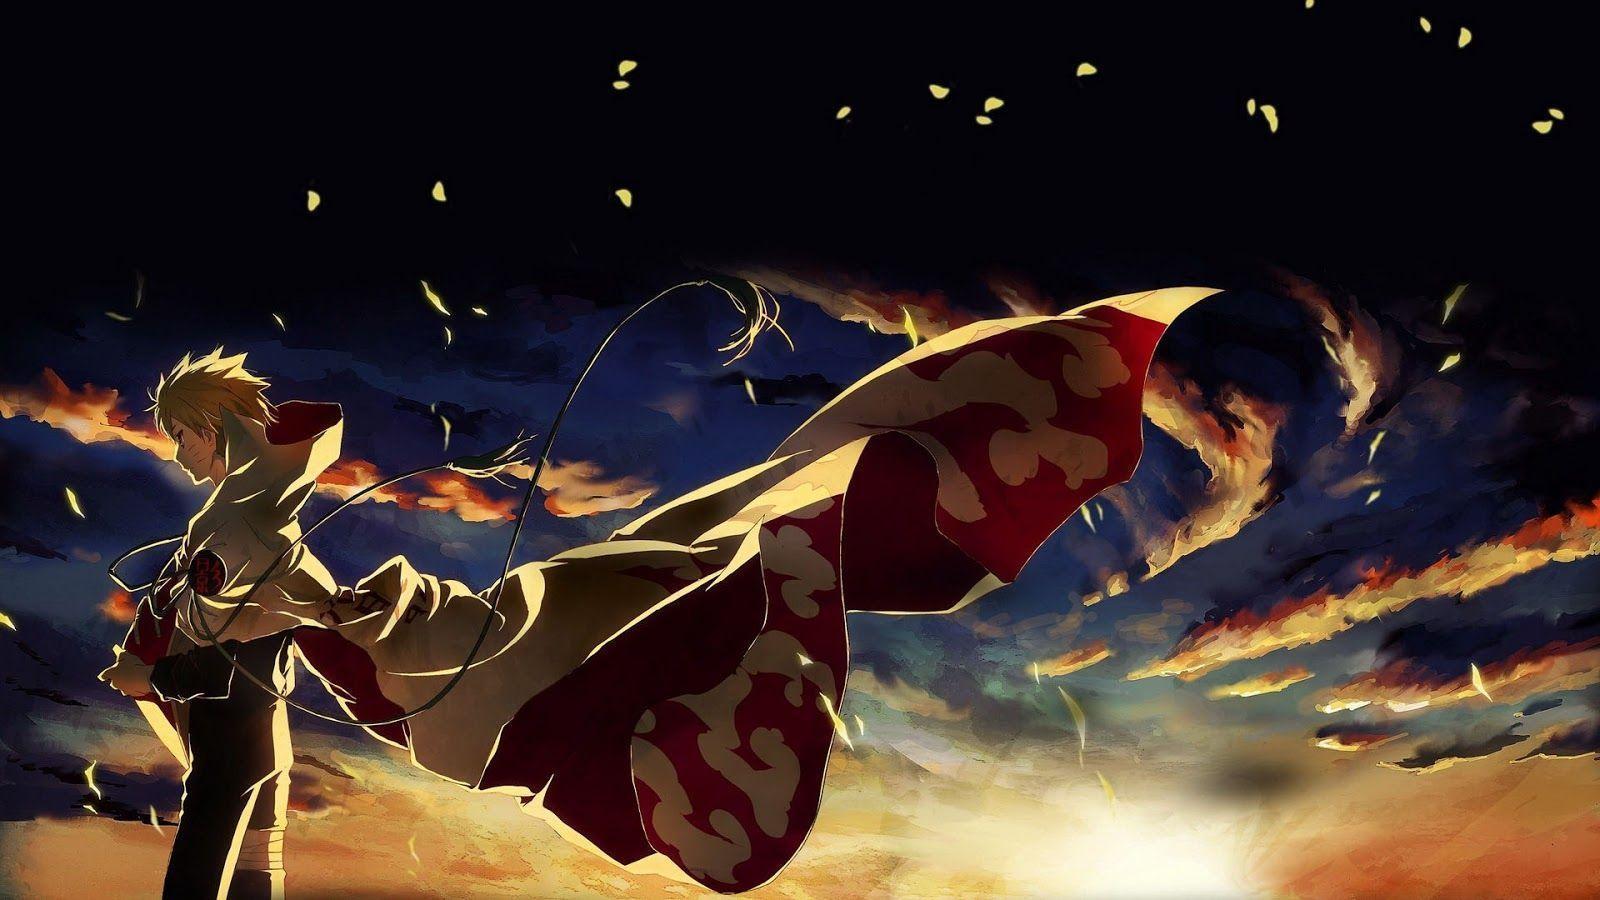 The Best Naruto Wallpaper, Videos And Latest Manga Chapter